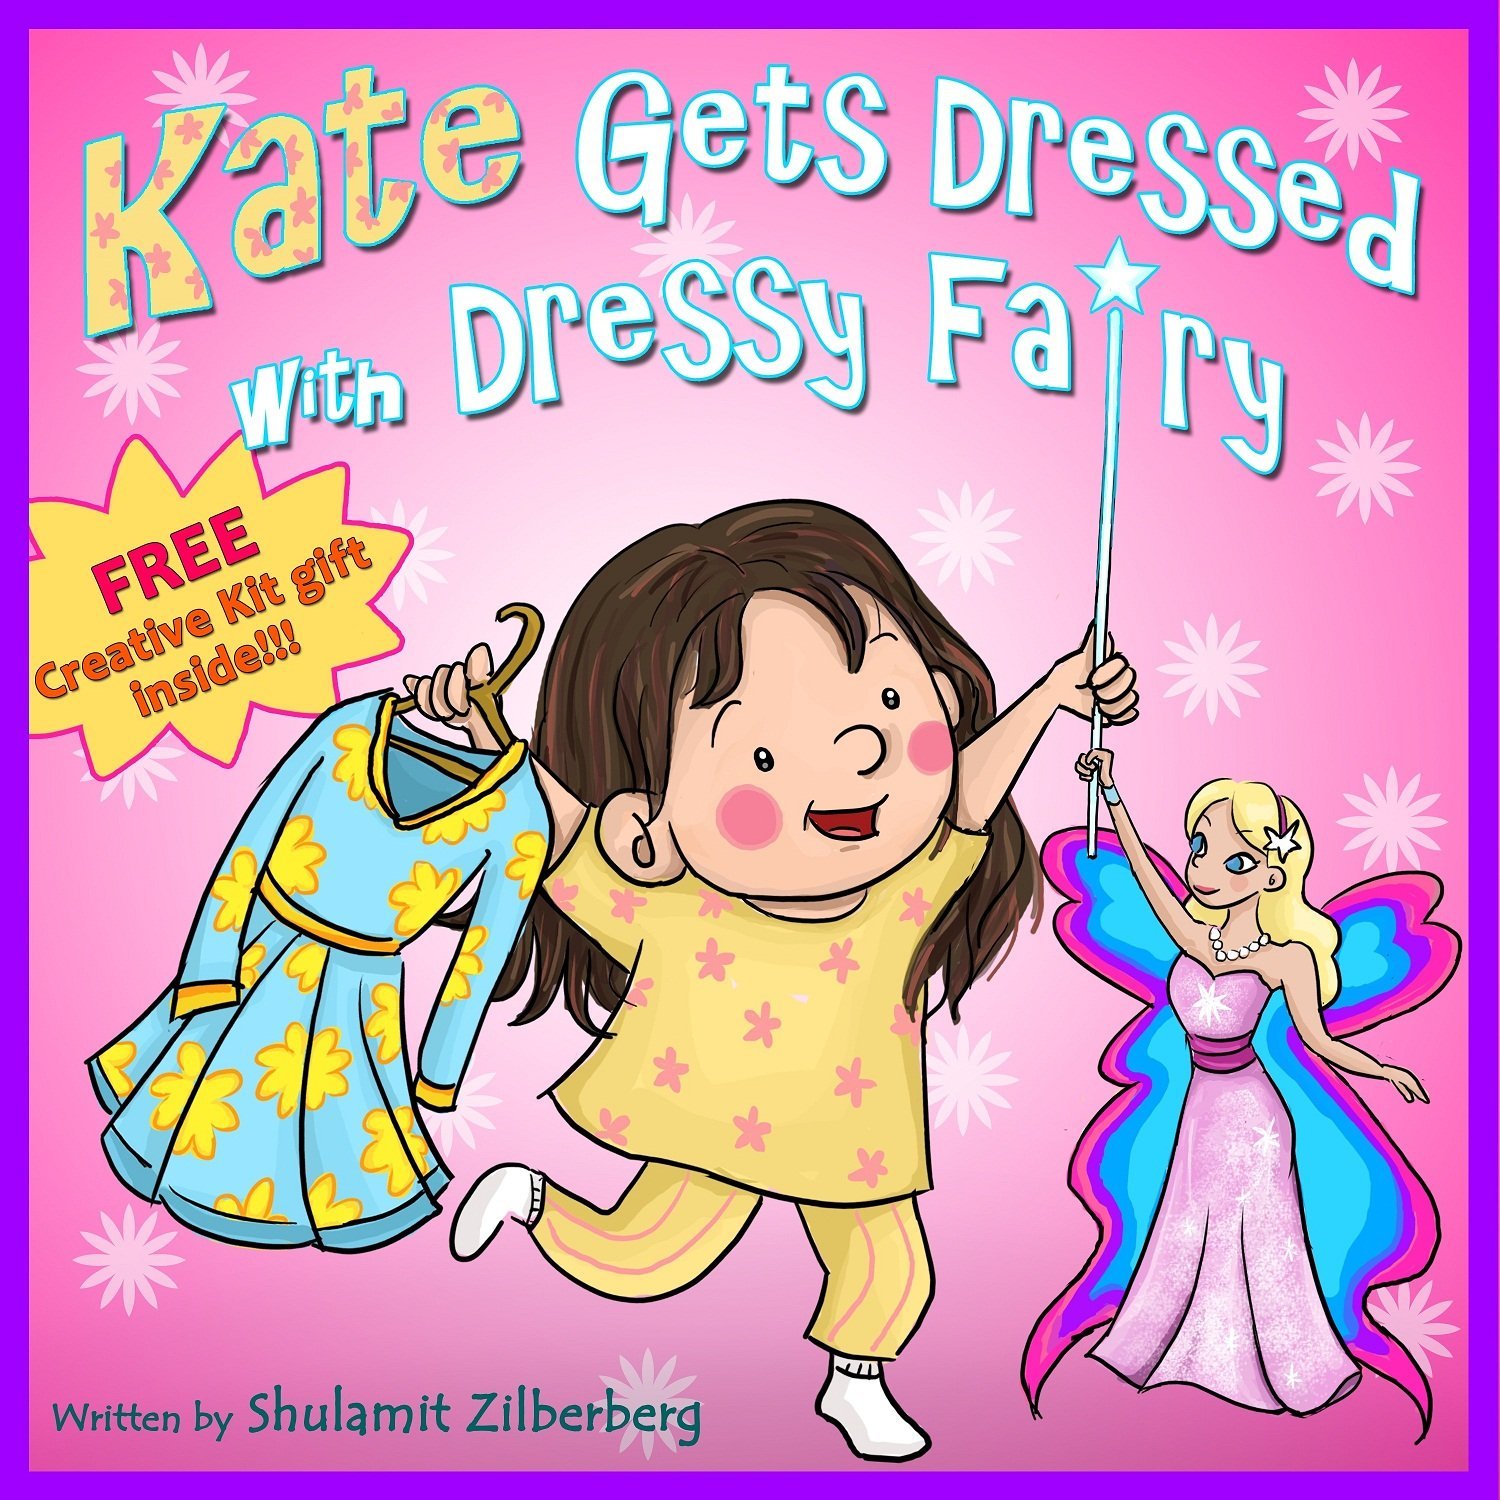 Kate Gets Dressed with Dressy Fairy by Shulamit Zilberberg